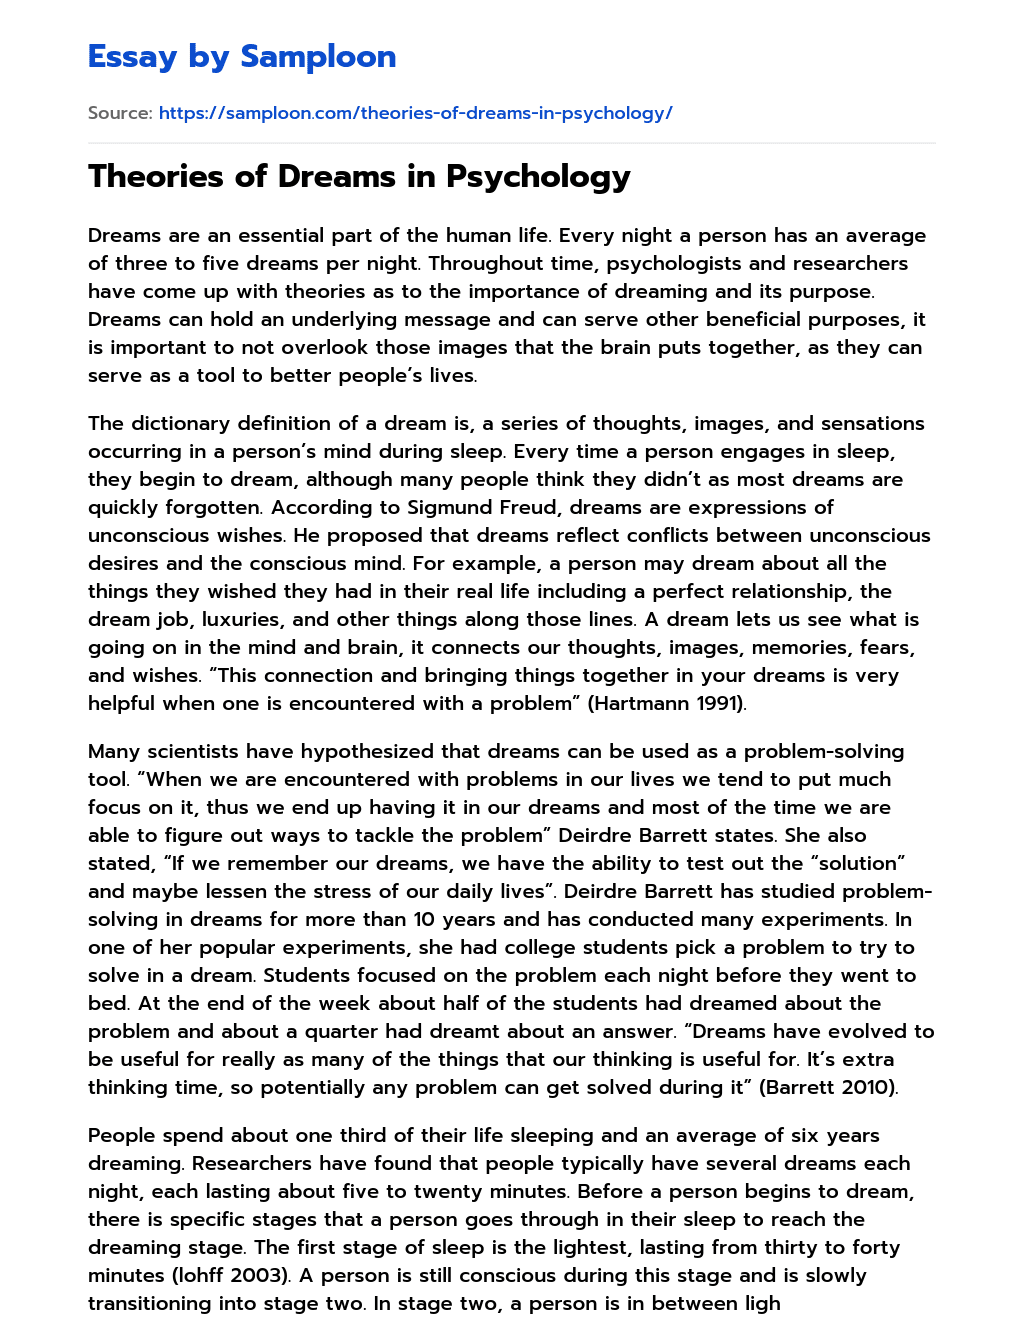 Theories of Dreams in Psychology essay